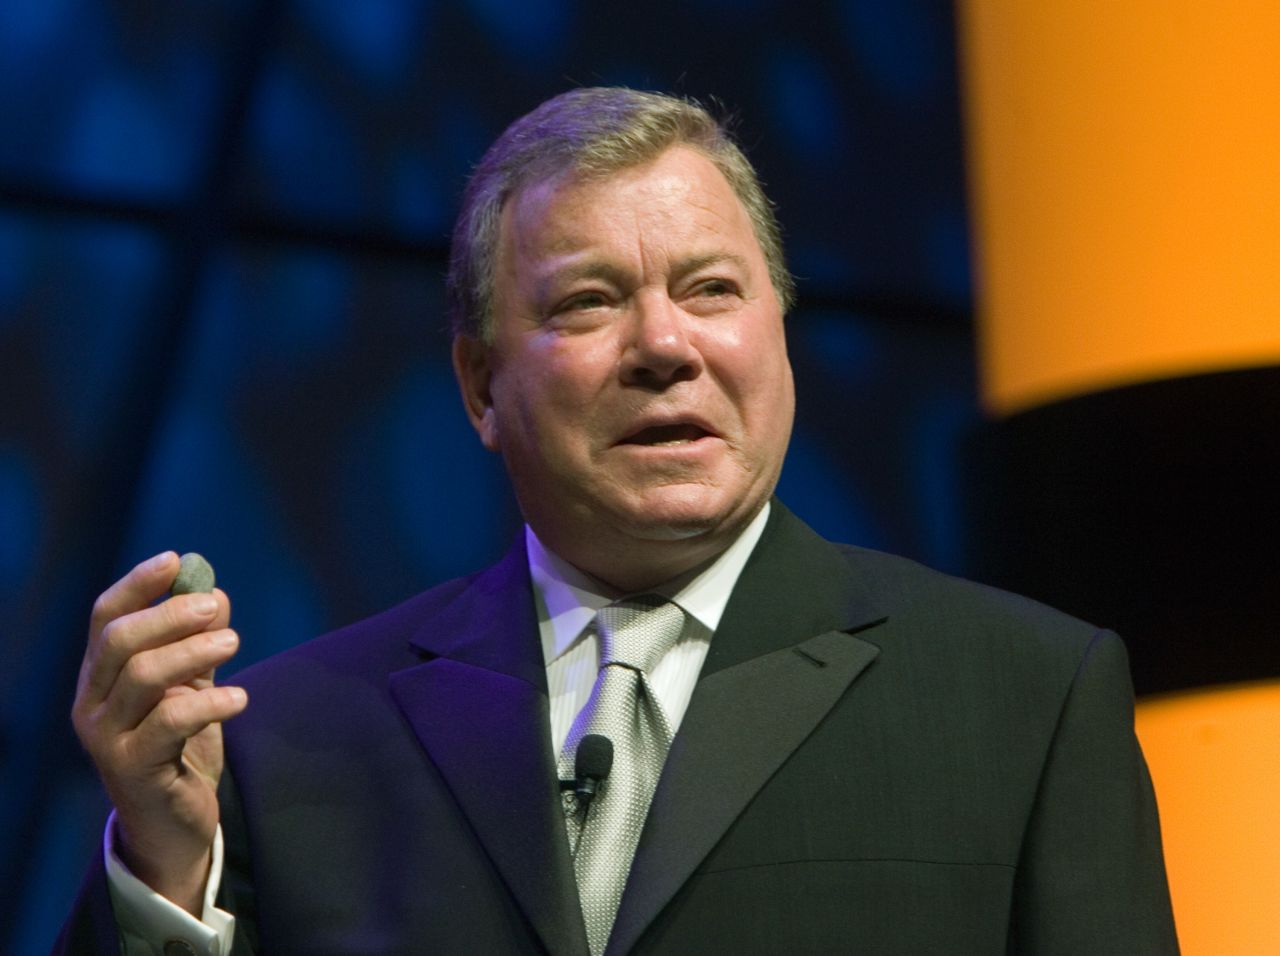 When William Shatner wanted to raise money for Habitat for Humanity in 2006, he offered up a piece of himself and put his kidney stone up for auction. It fetched $25,000. 